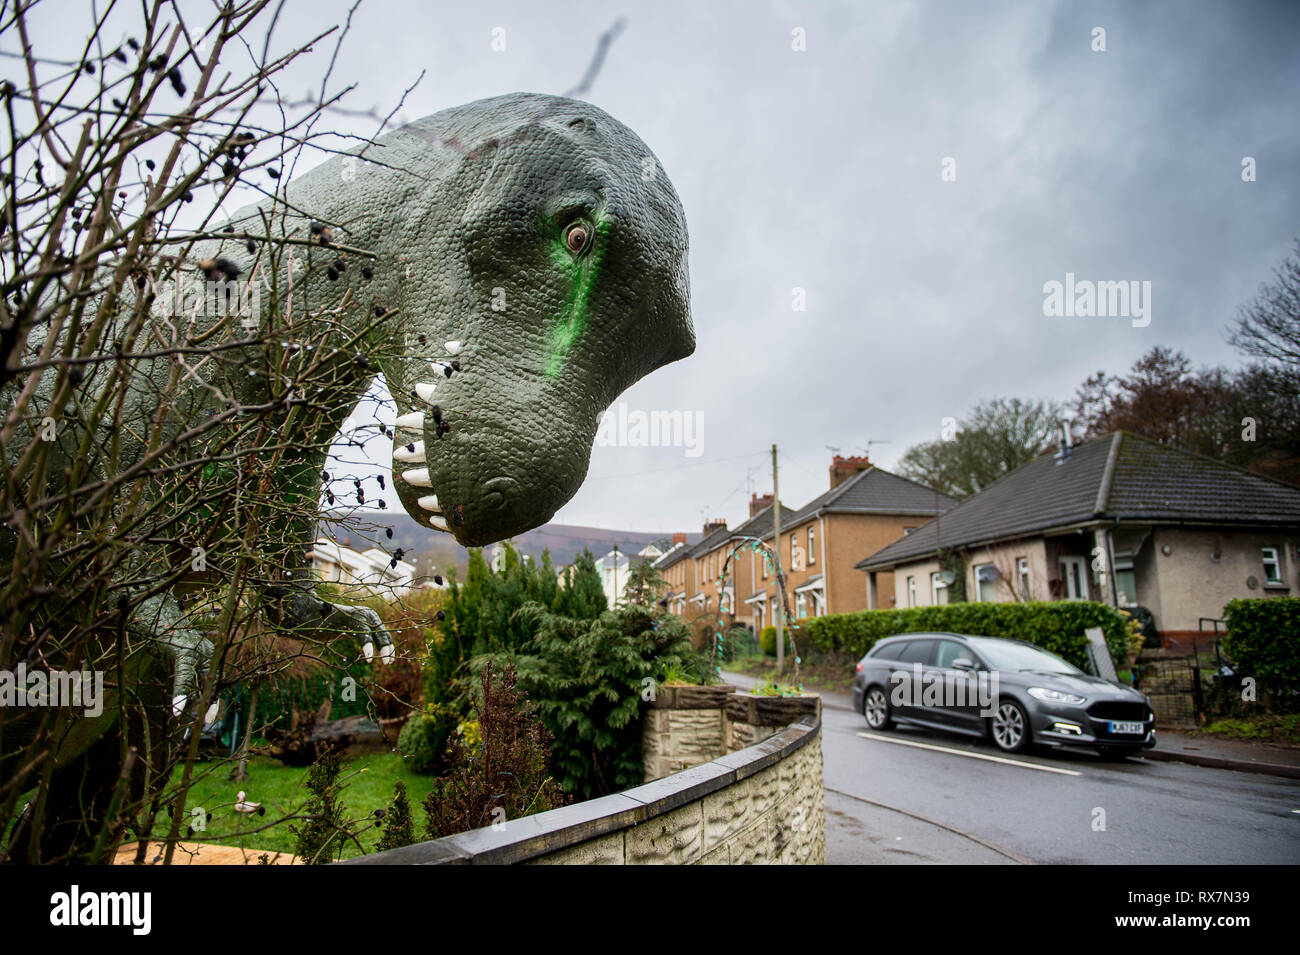 Friday  08 March 2019  Pictured: Alun the dinosaur outside the house in Cwmbran Re: Alun the allosaurus has found a new home in a Cwmbran garden. The  Stock Photo